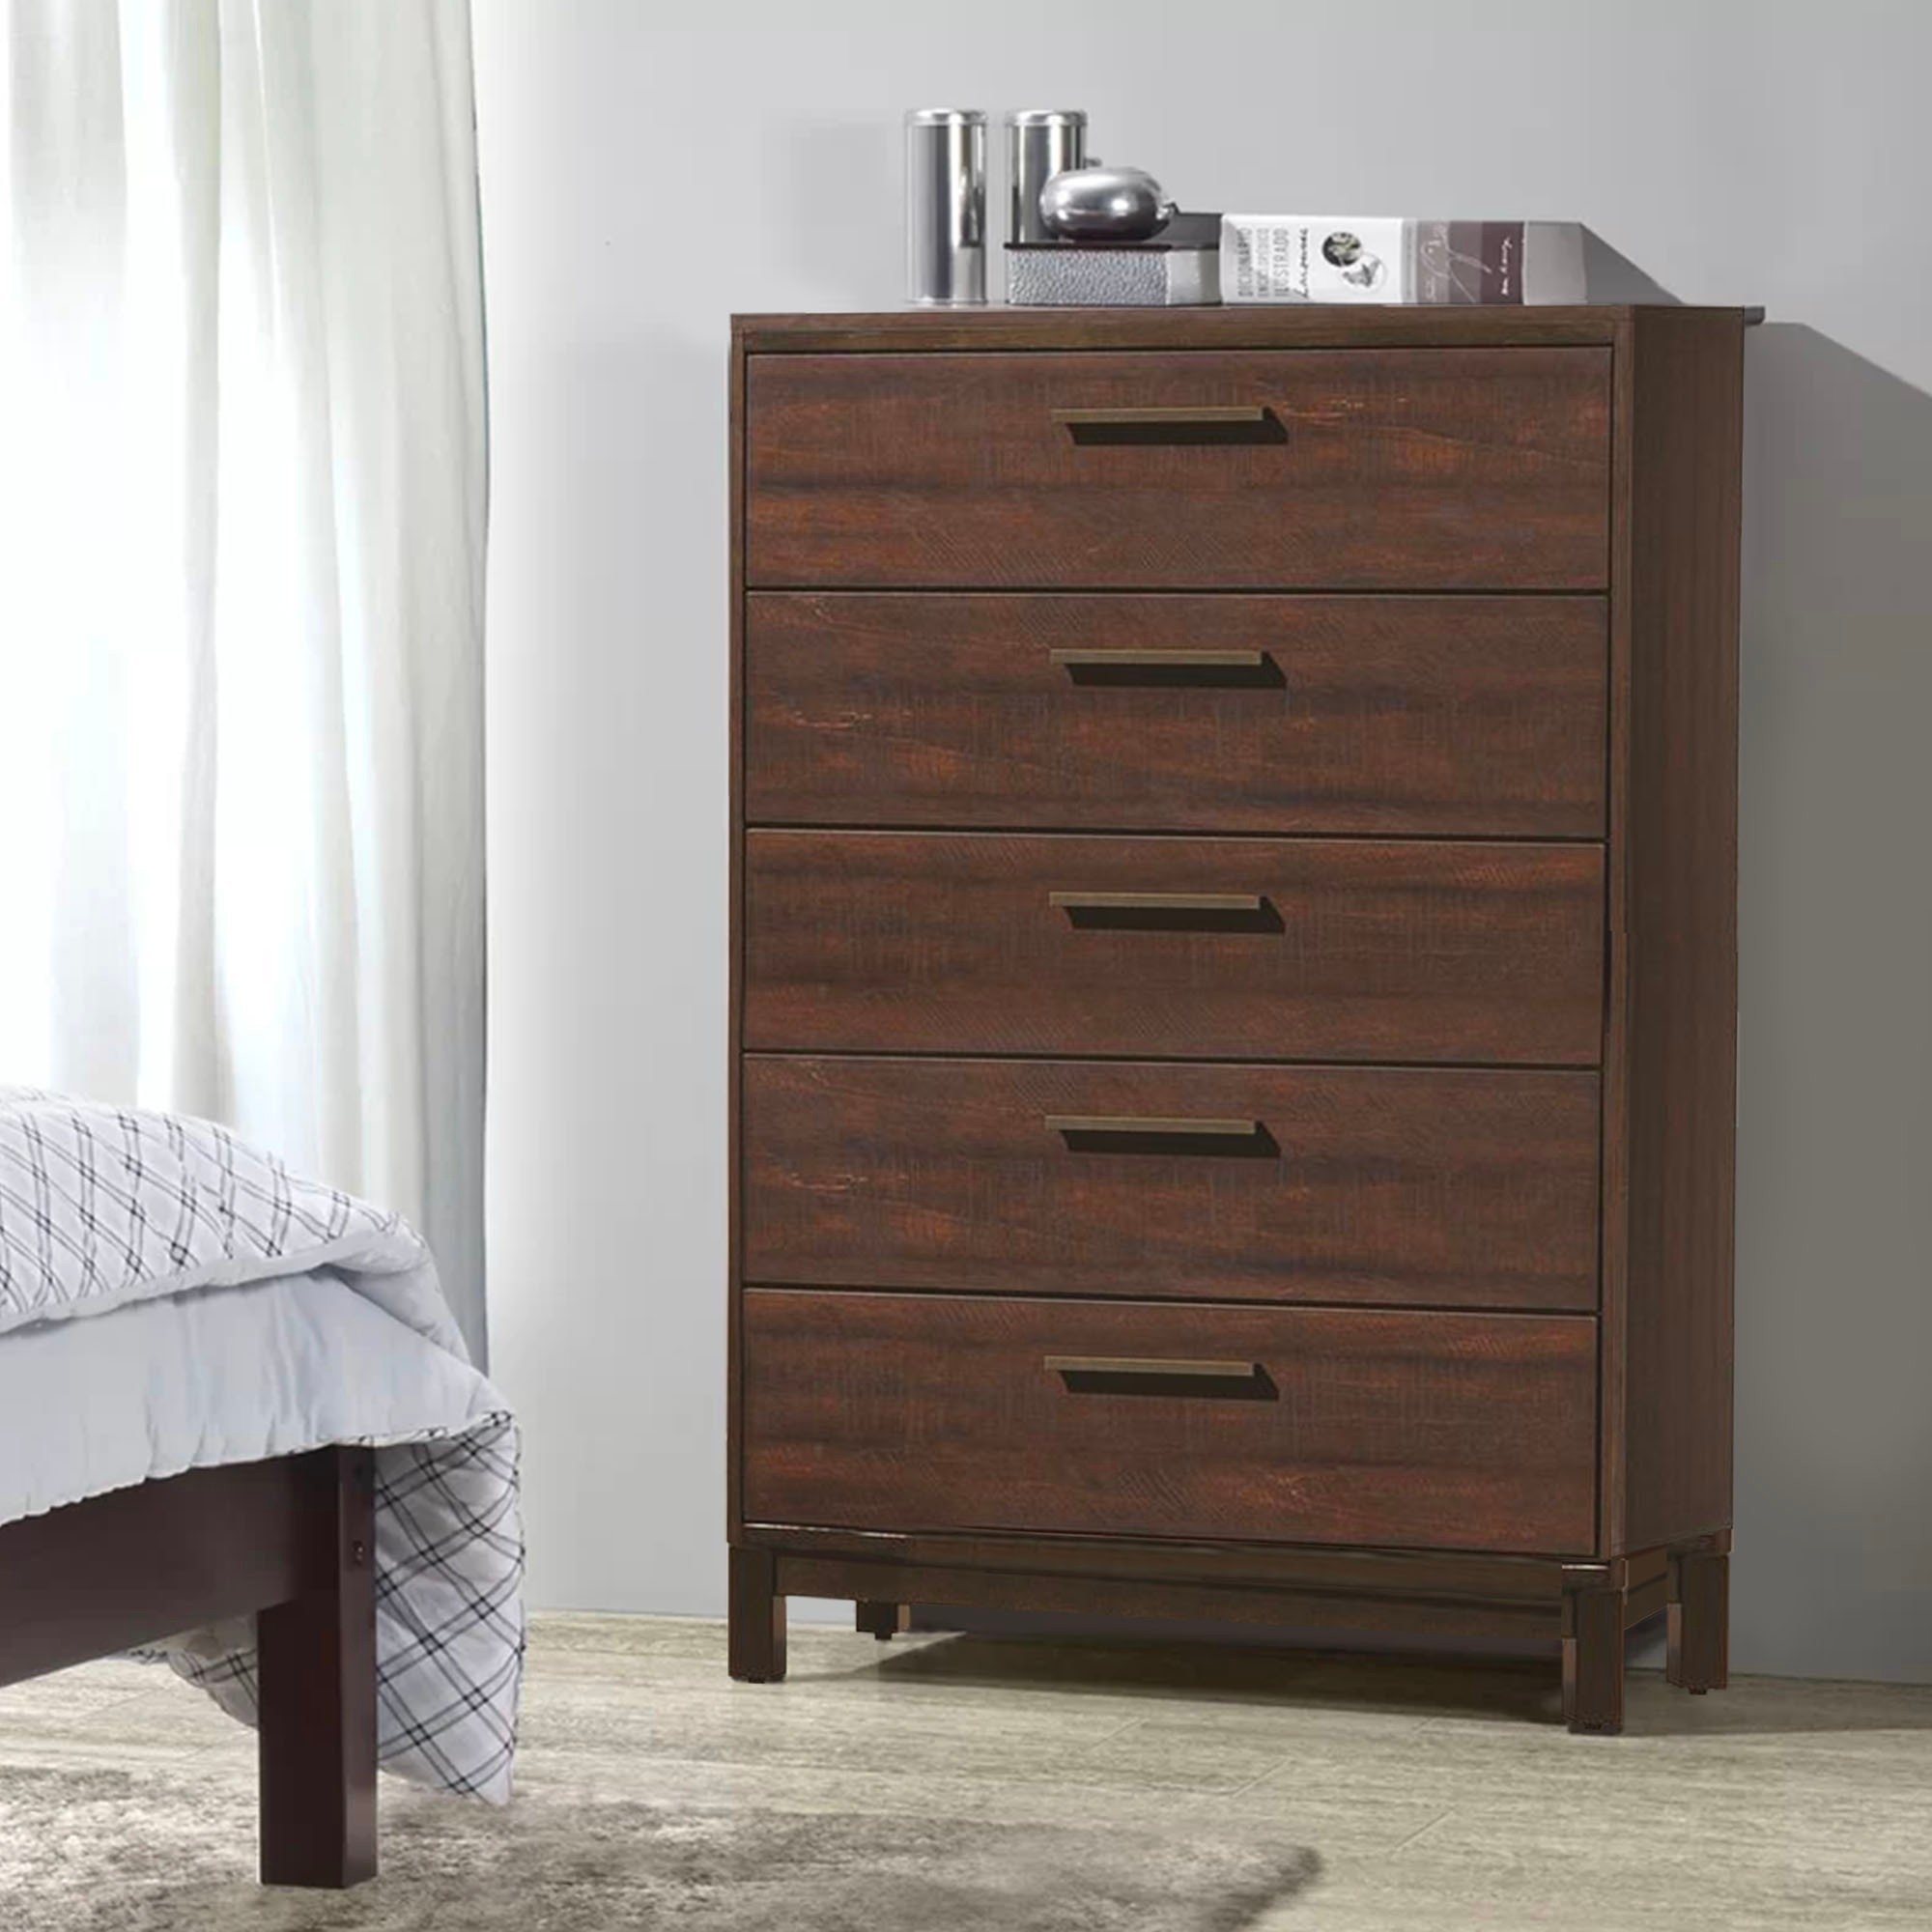 Wooden Chest With Five Drawers And Block Legs Support, Dark Brown- Saltoro Sherpi